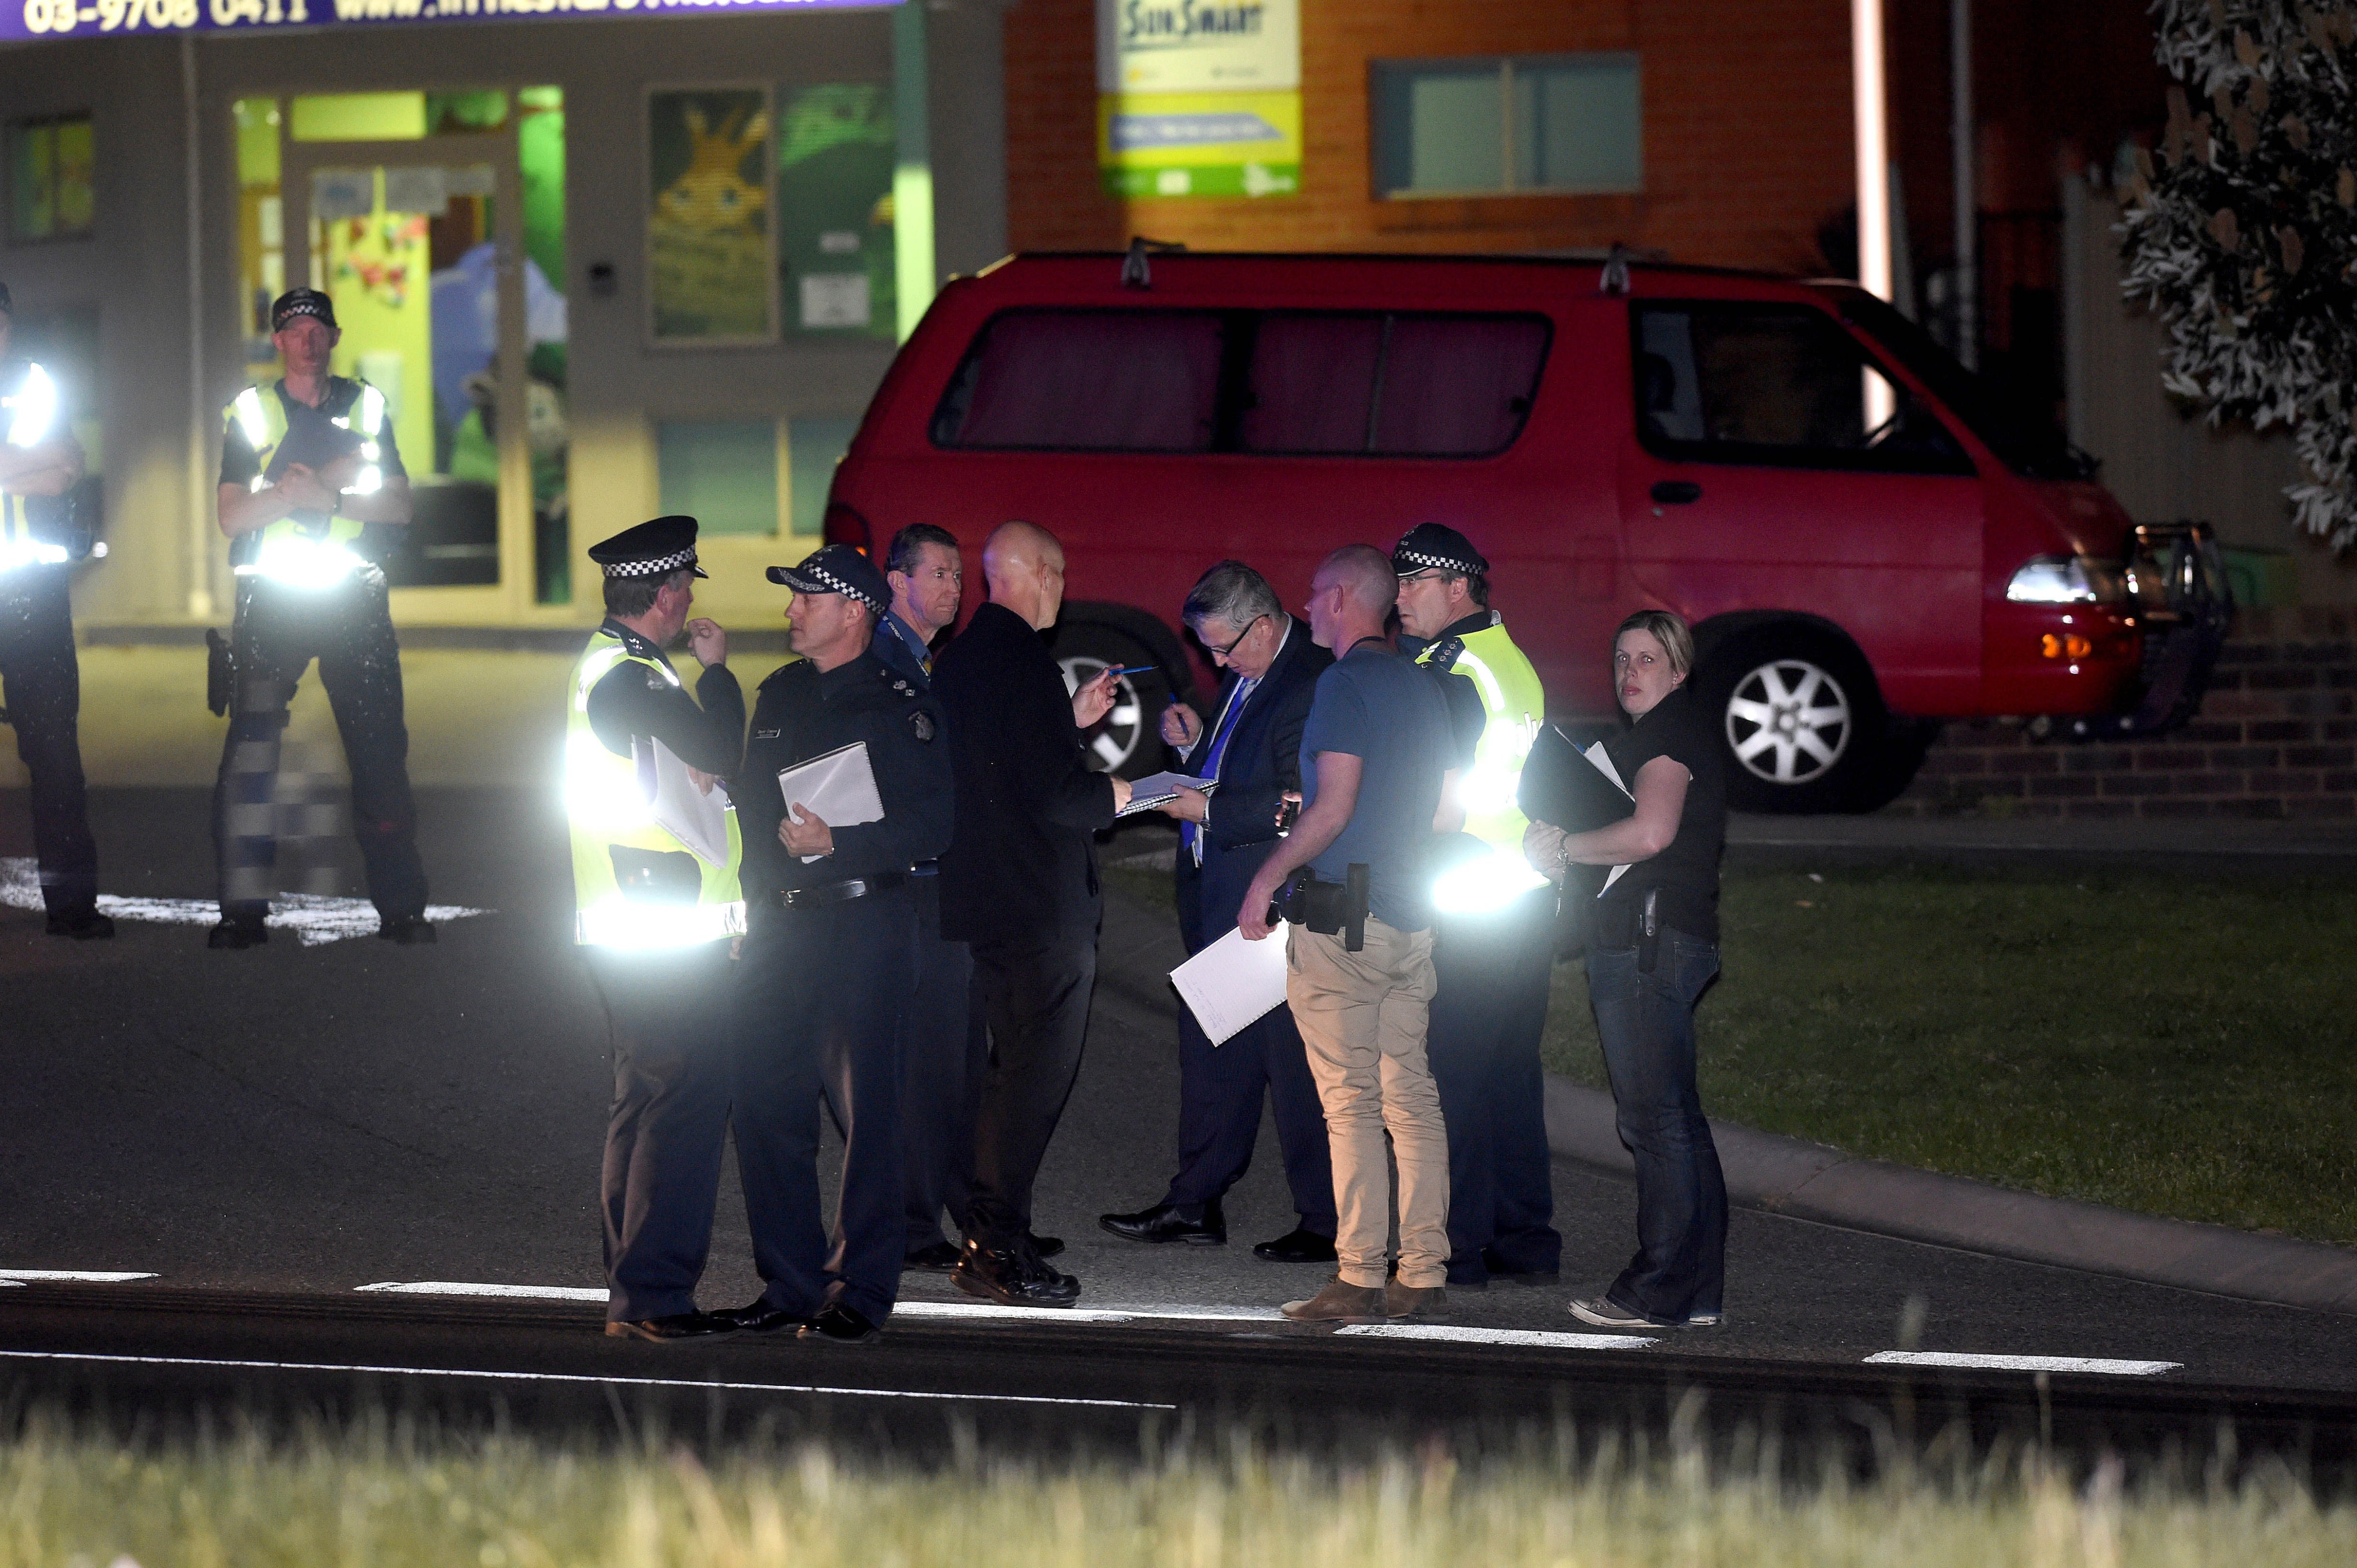 Investigators at the scene after a teenage terror suspect was shot dead after stabbing a Victorian officer and a federal police agent outside Endeavour Hills police station on September 23, 2014 in Melbourne, Australia. (Newspix—Newspix via Getty Images)